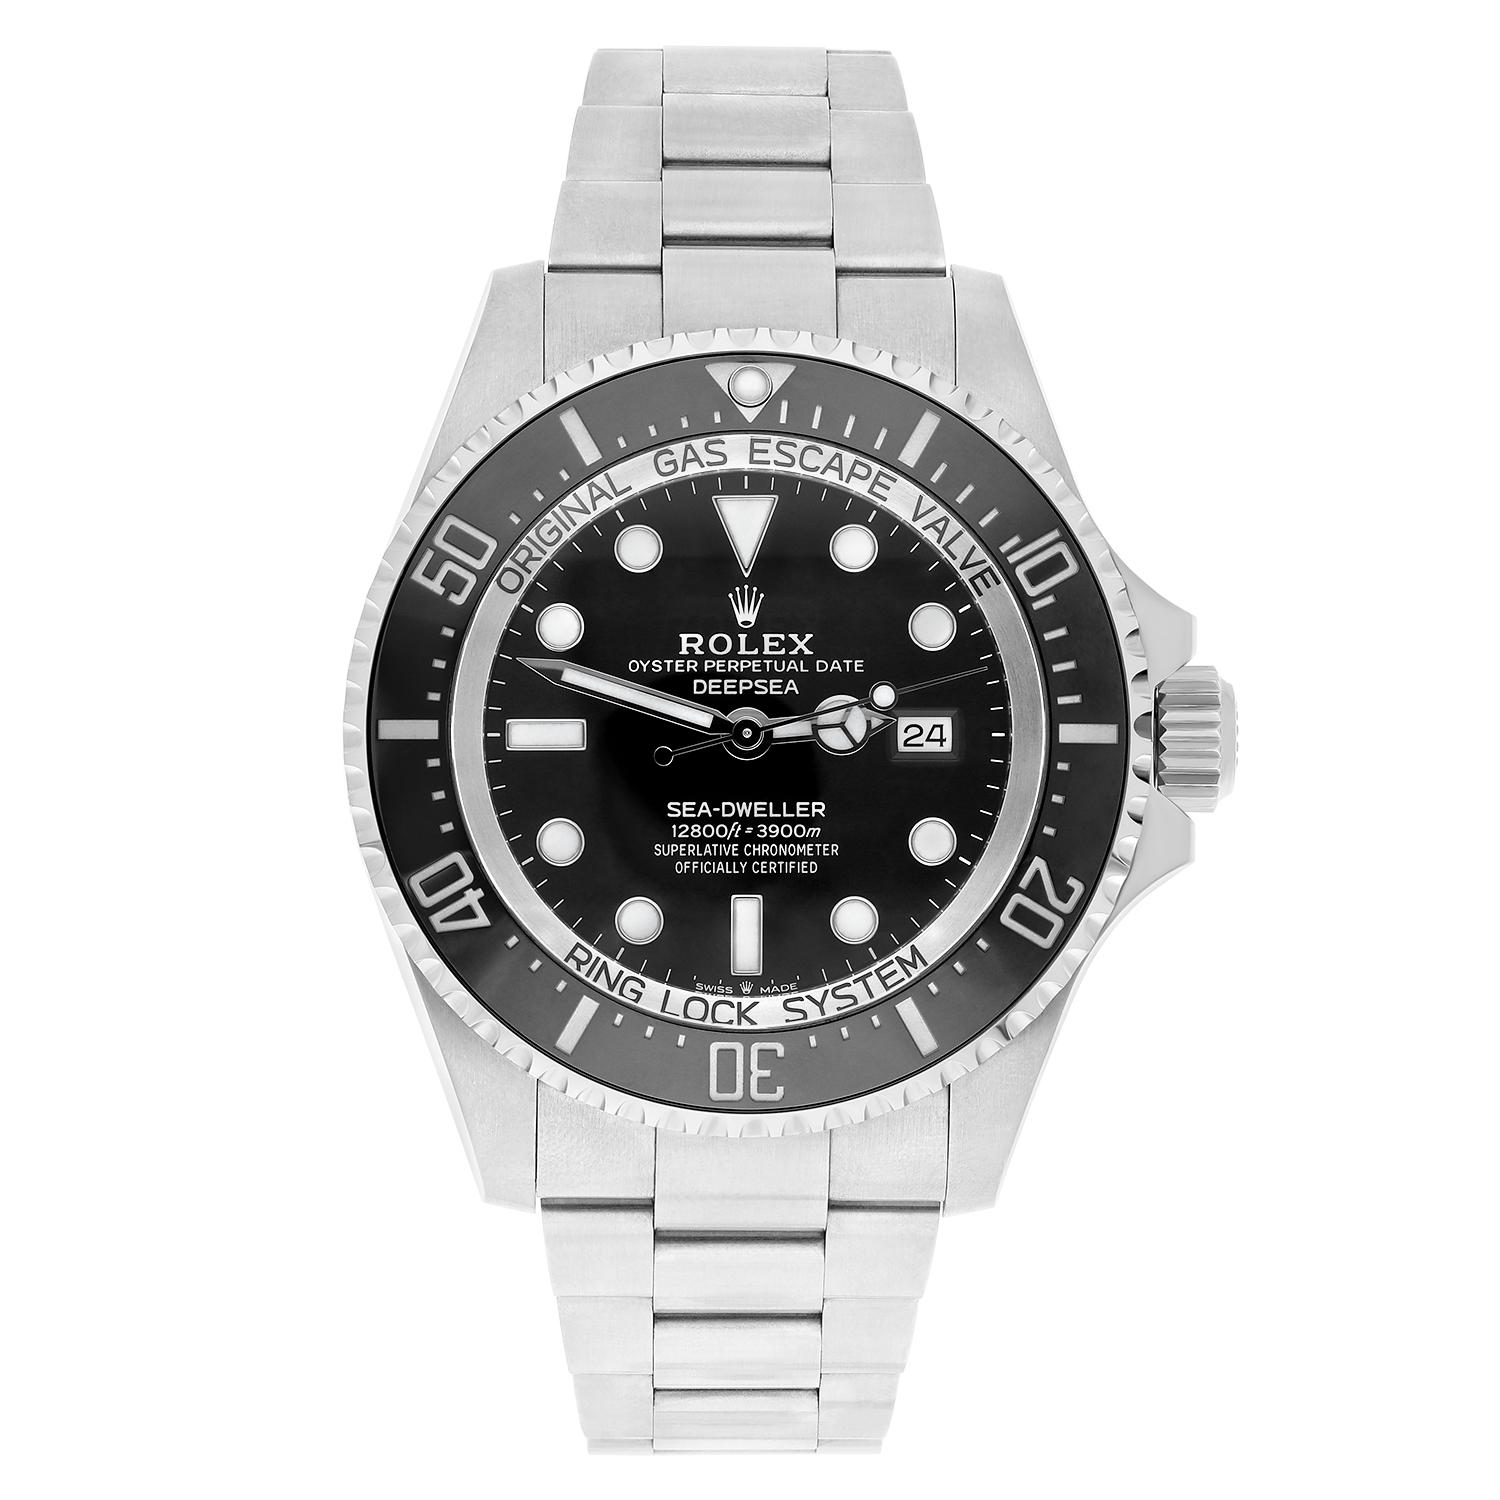 This watch has been professionally polished, serviced and does not have any visible scratches or blemishes. It is a genuine Rolex which has been inspected to verify authenticity.

Sale comes with a Rolex box and Rolex papers. Watch is covered by our